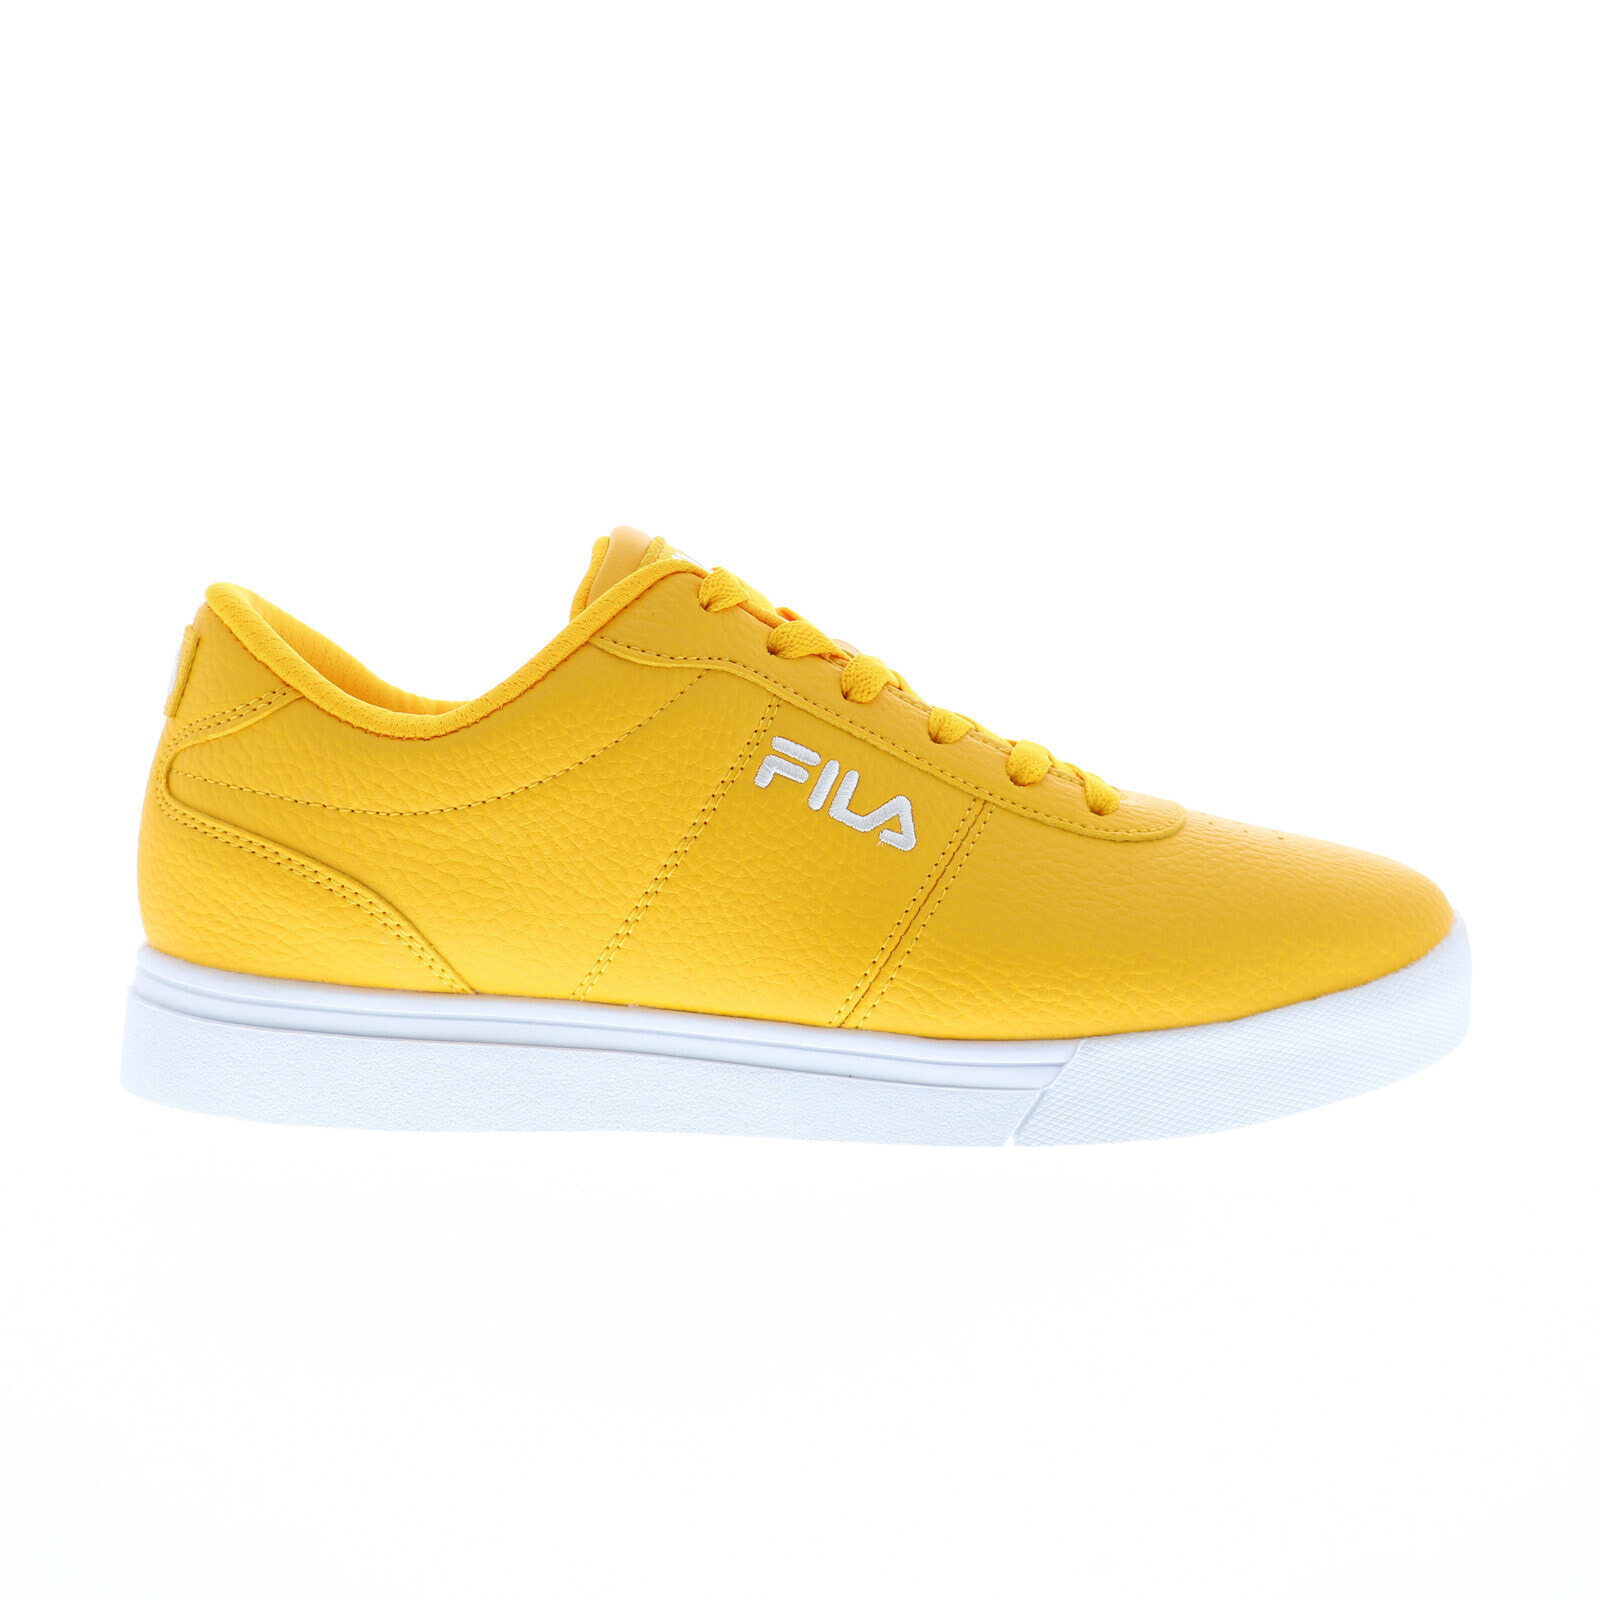 Fila Impress LL 1FM01154-720 Mens Yellow Synthetic Lifestyle Sneakers Shoes